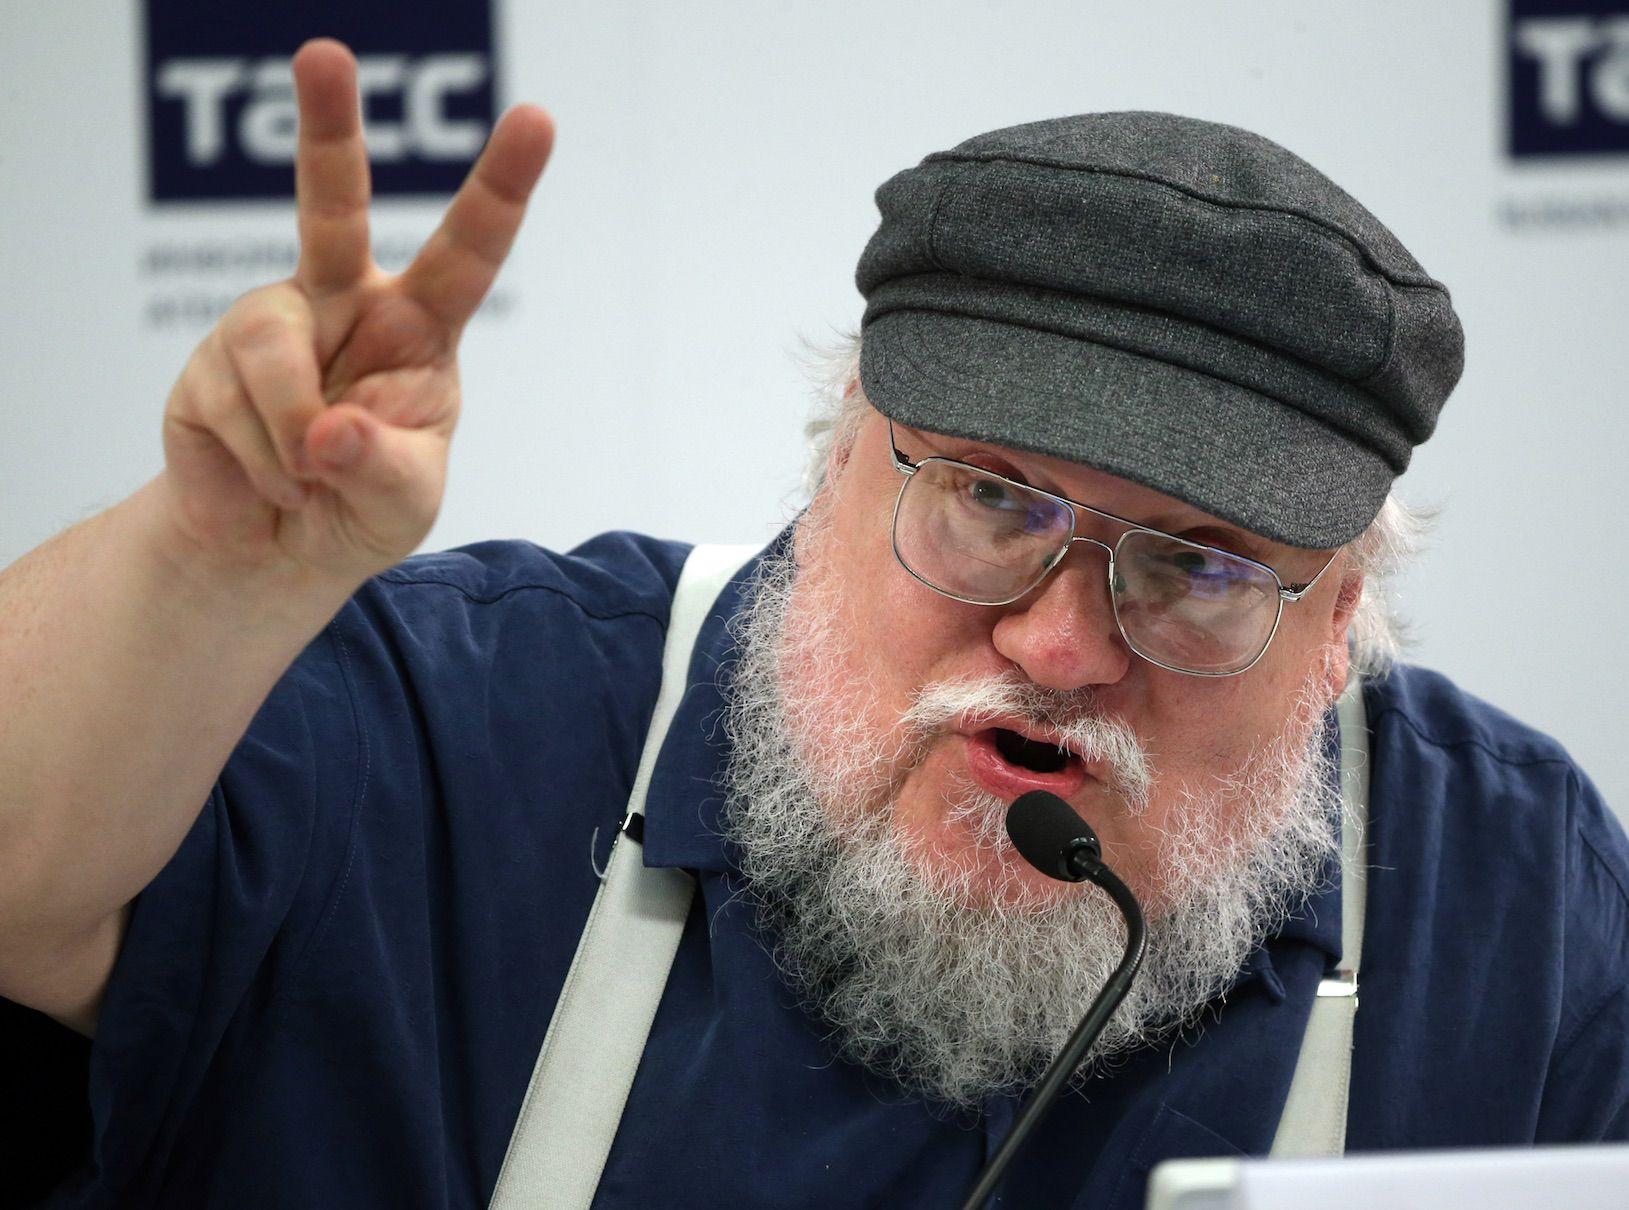 ways that Game of Thrones could end, based on George RR Martin's hints